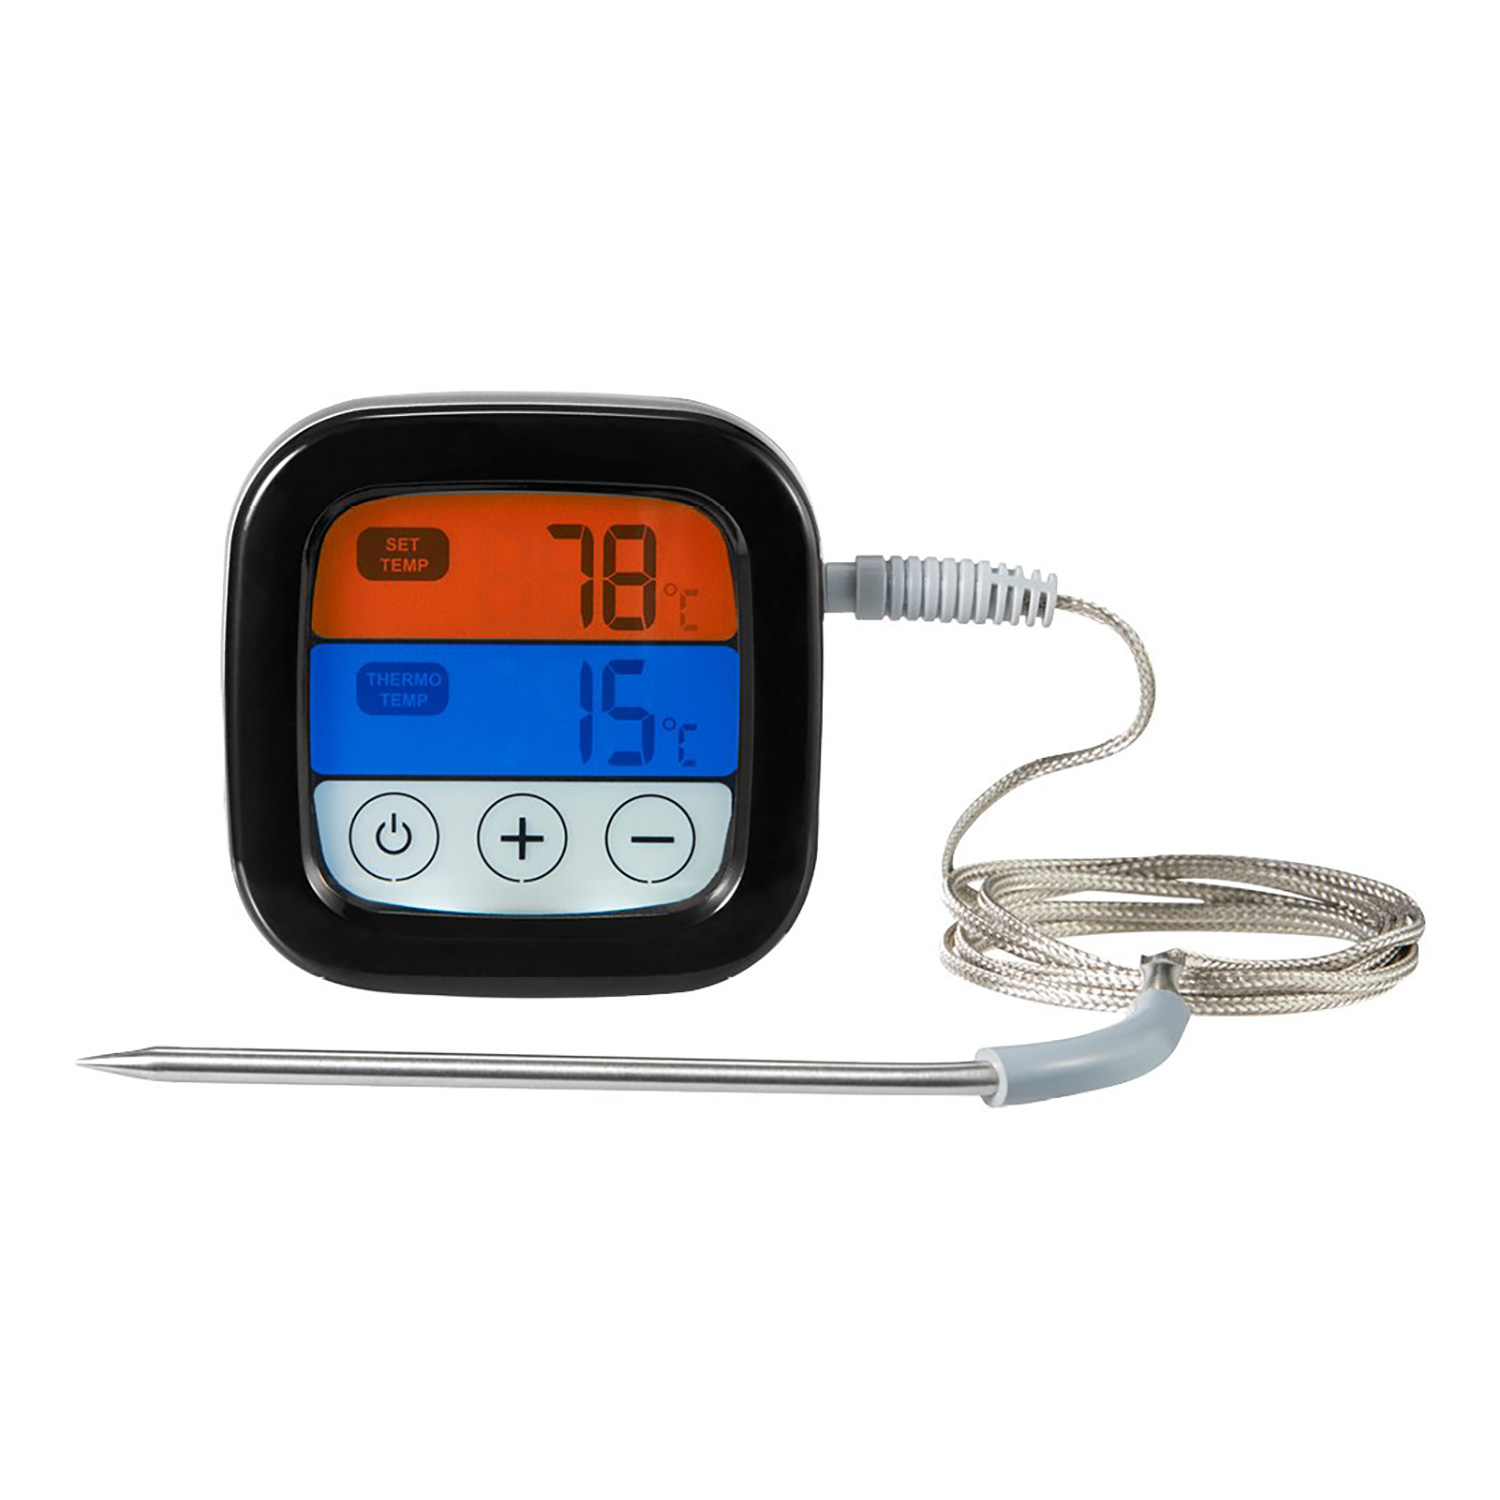 SMARTRO ST59 Digital Meat Thermometer for Oven – Meat Thermometers and  Outdoor Thermometers